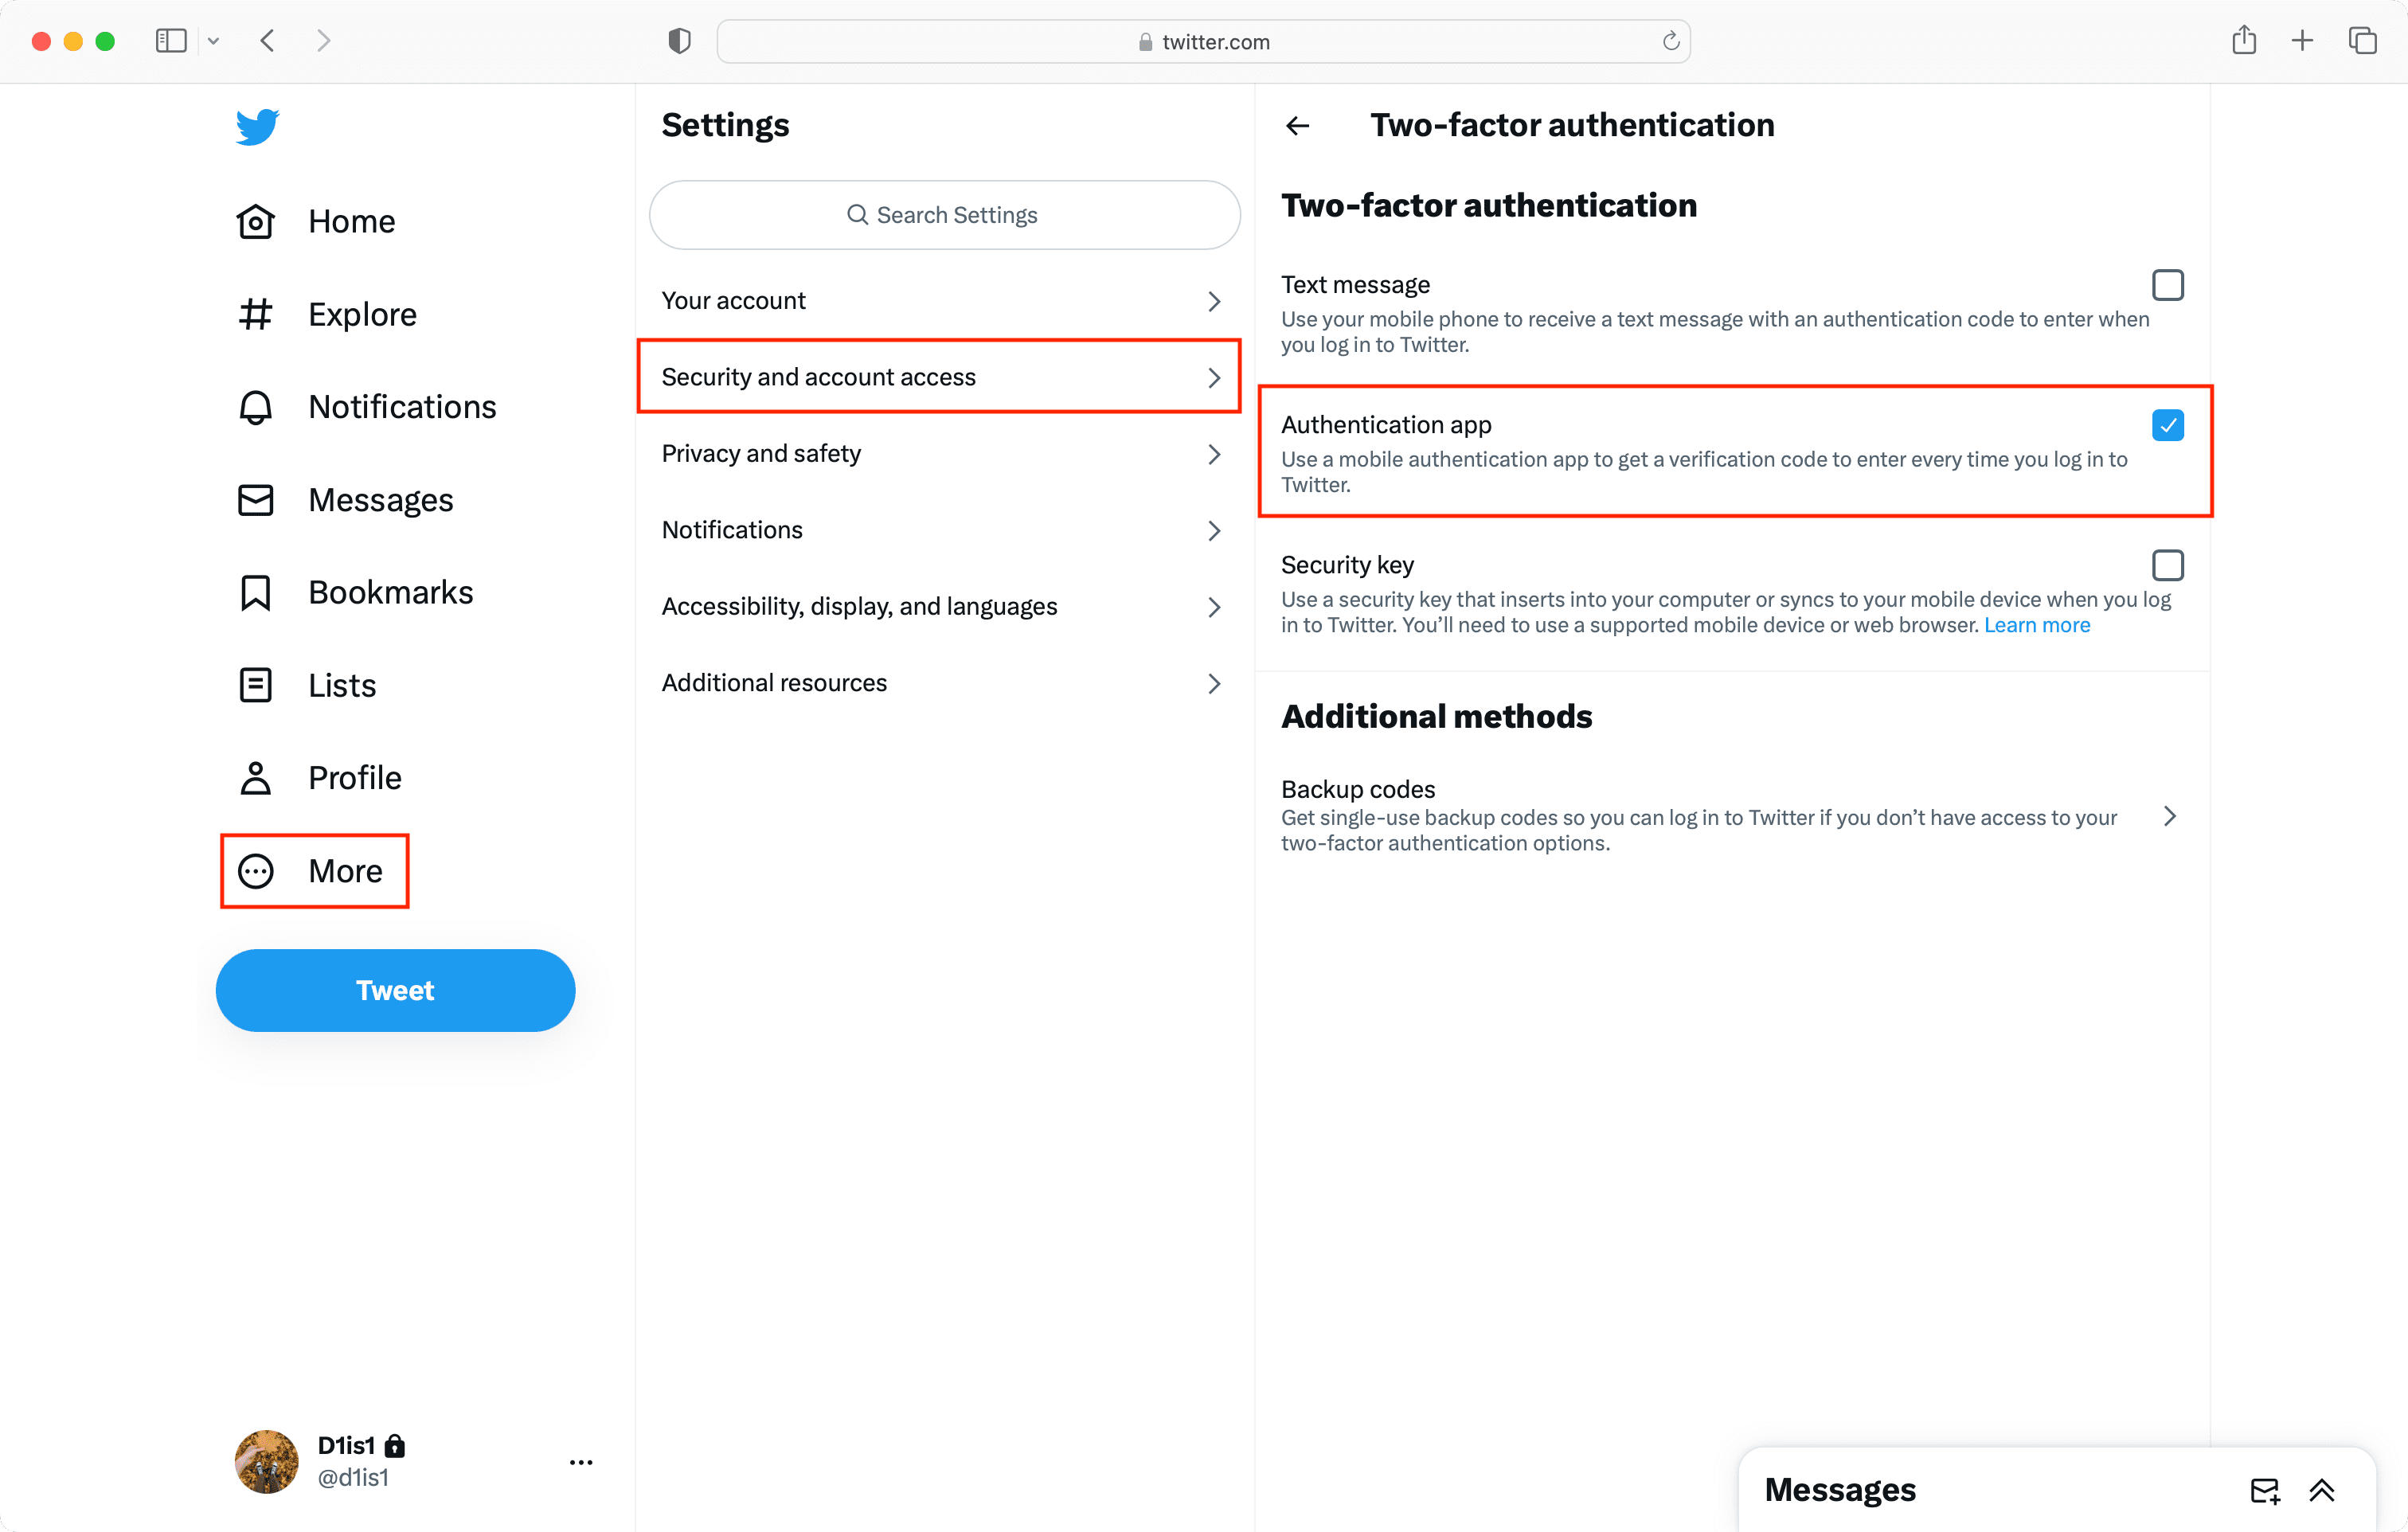 Check Authentication app from Twitter security settings